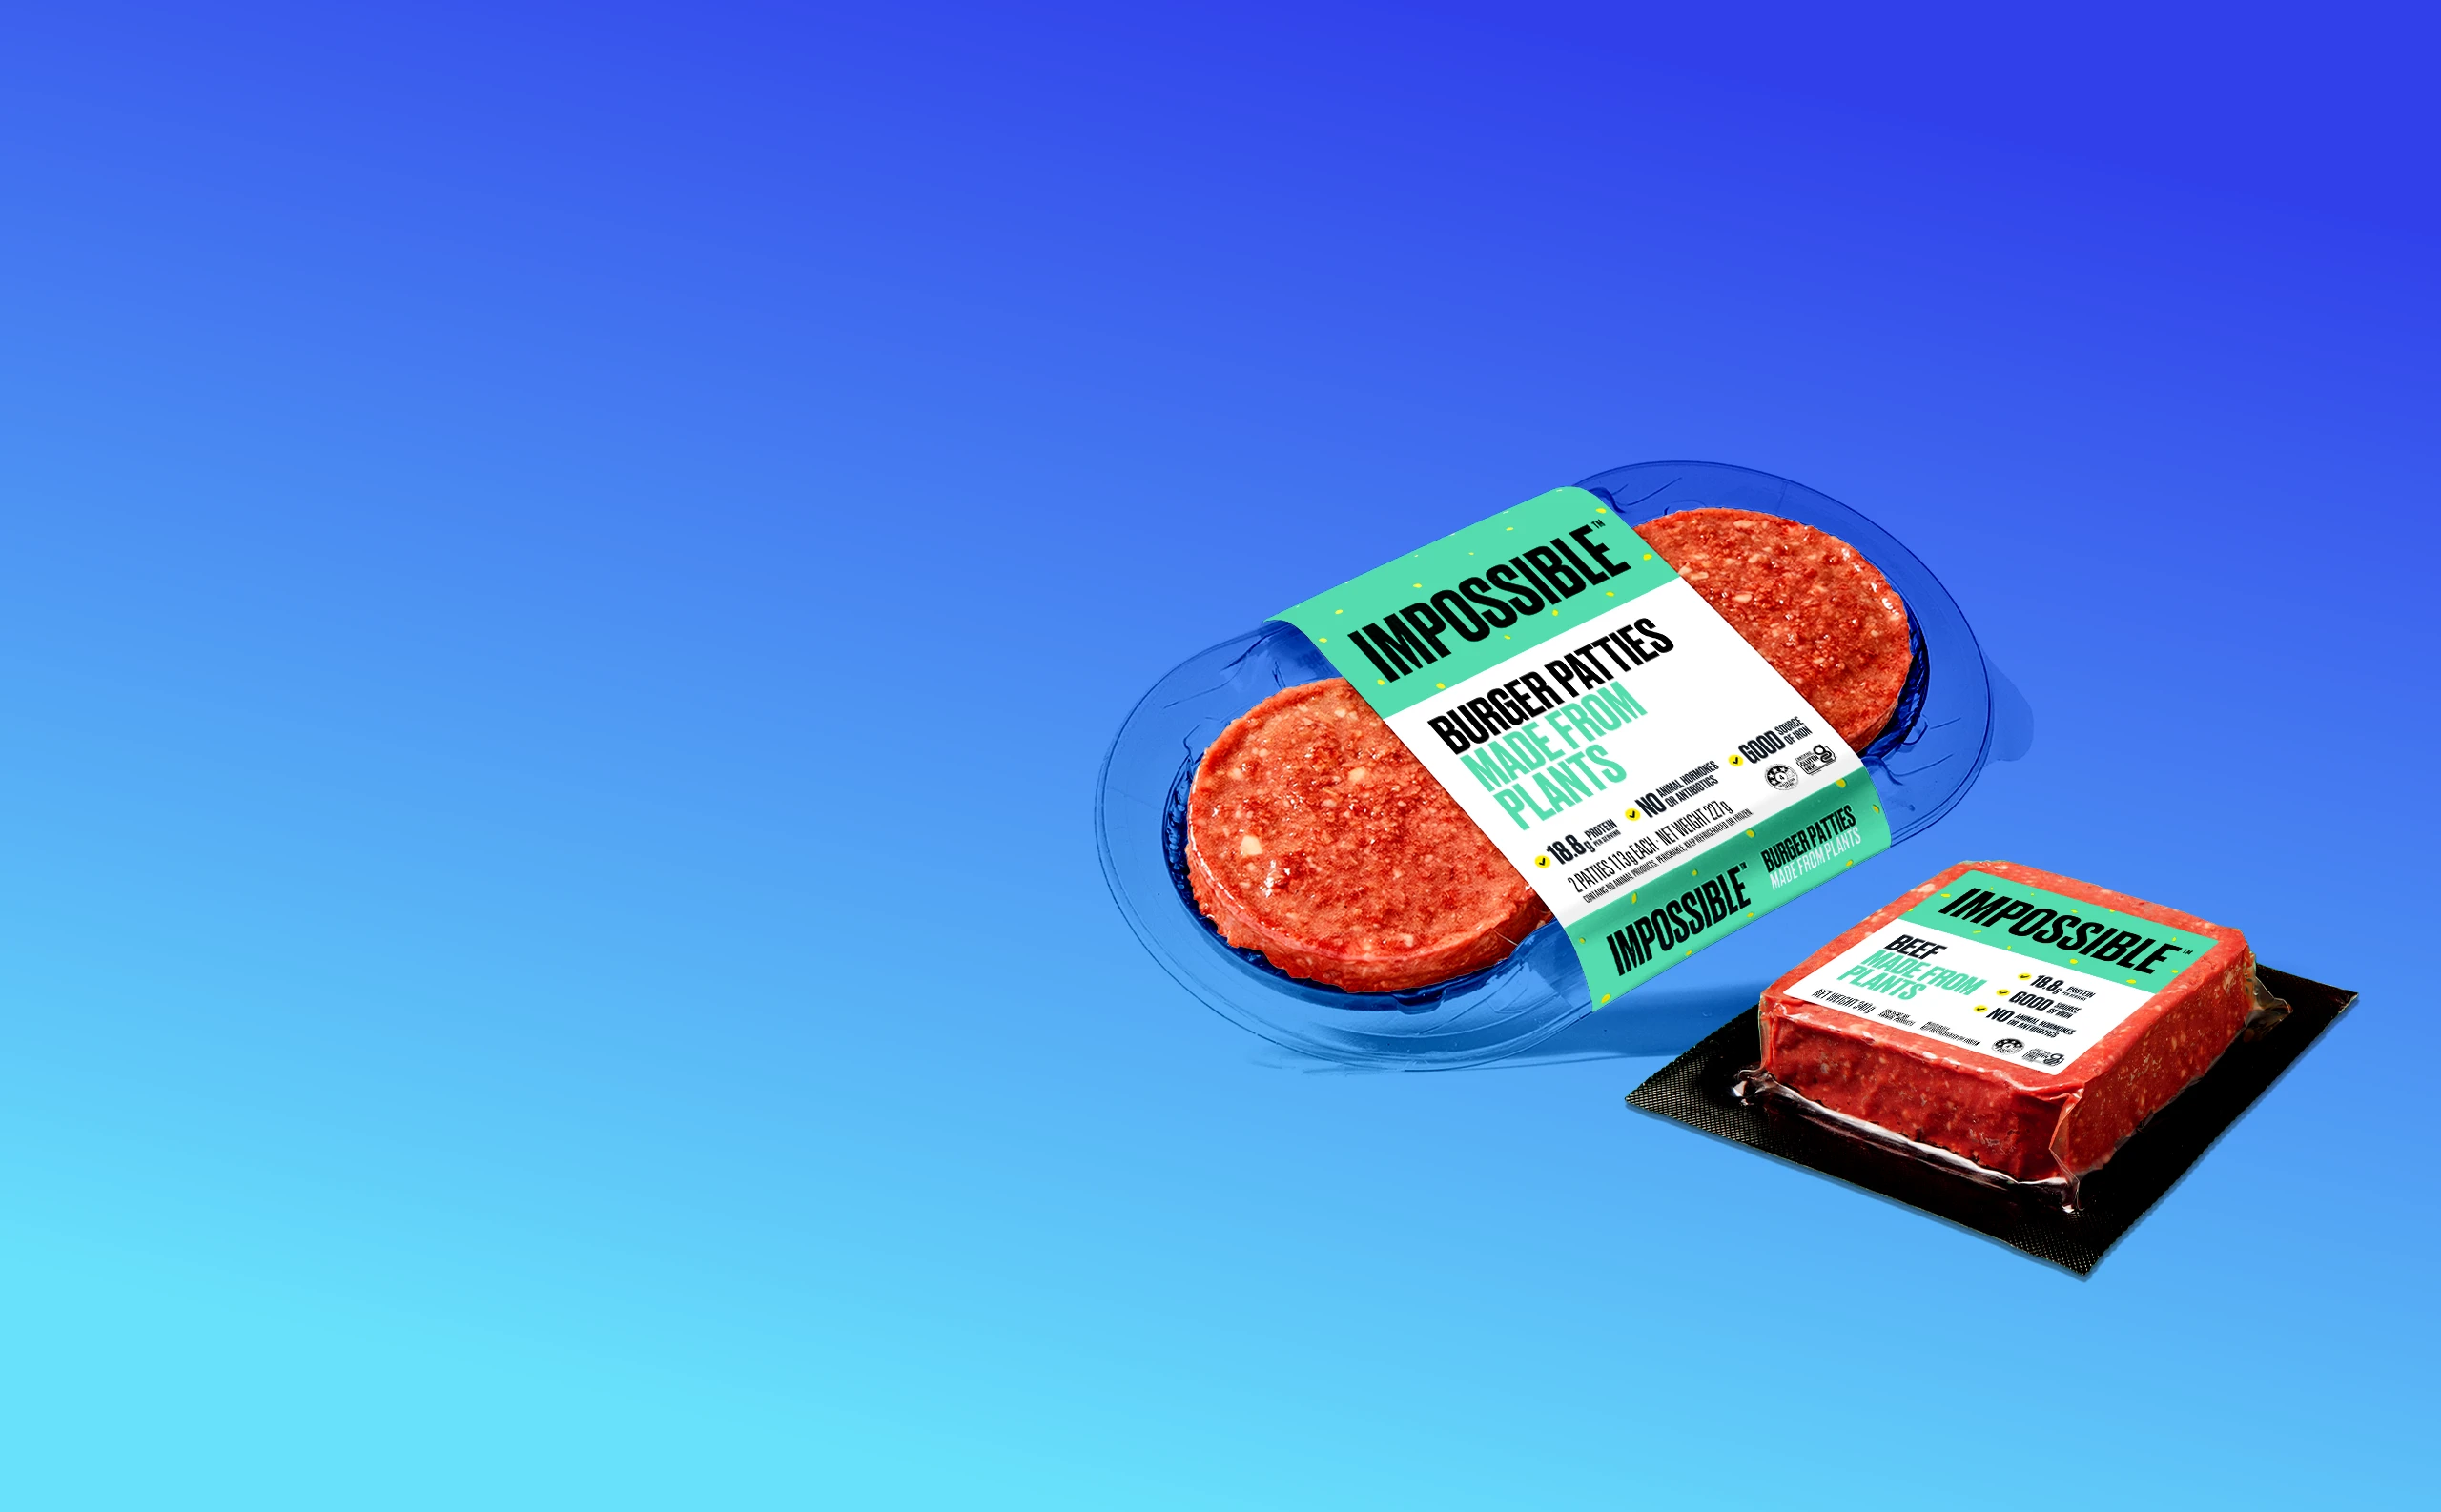 Image of Impossible Burger Patties package and Impossible Beef Made From Plants brick package